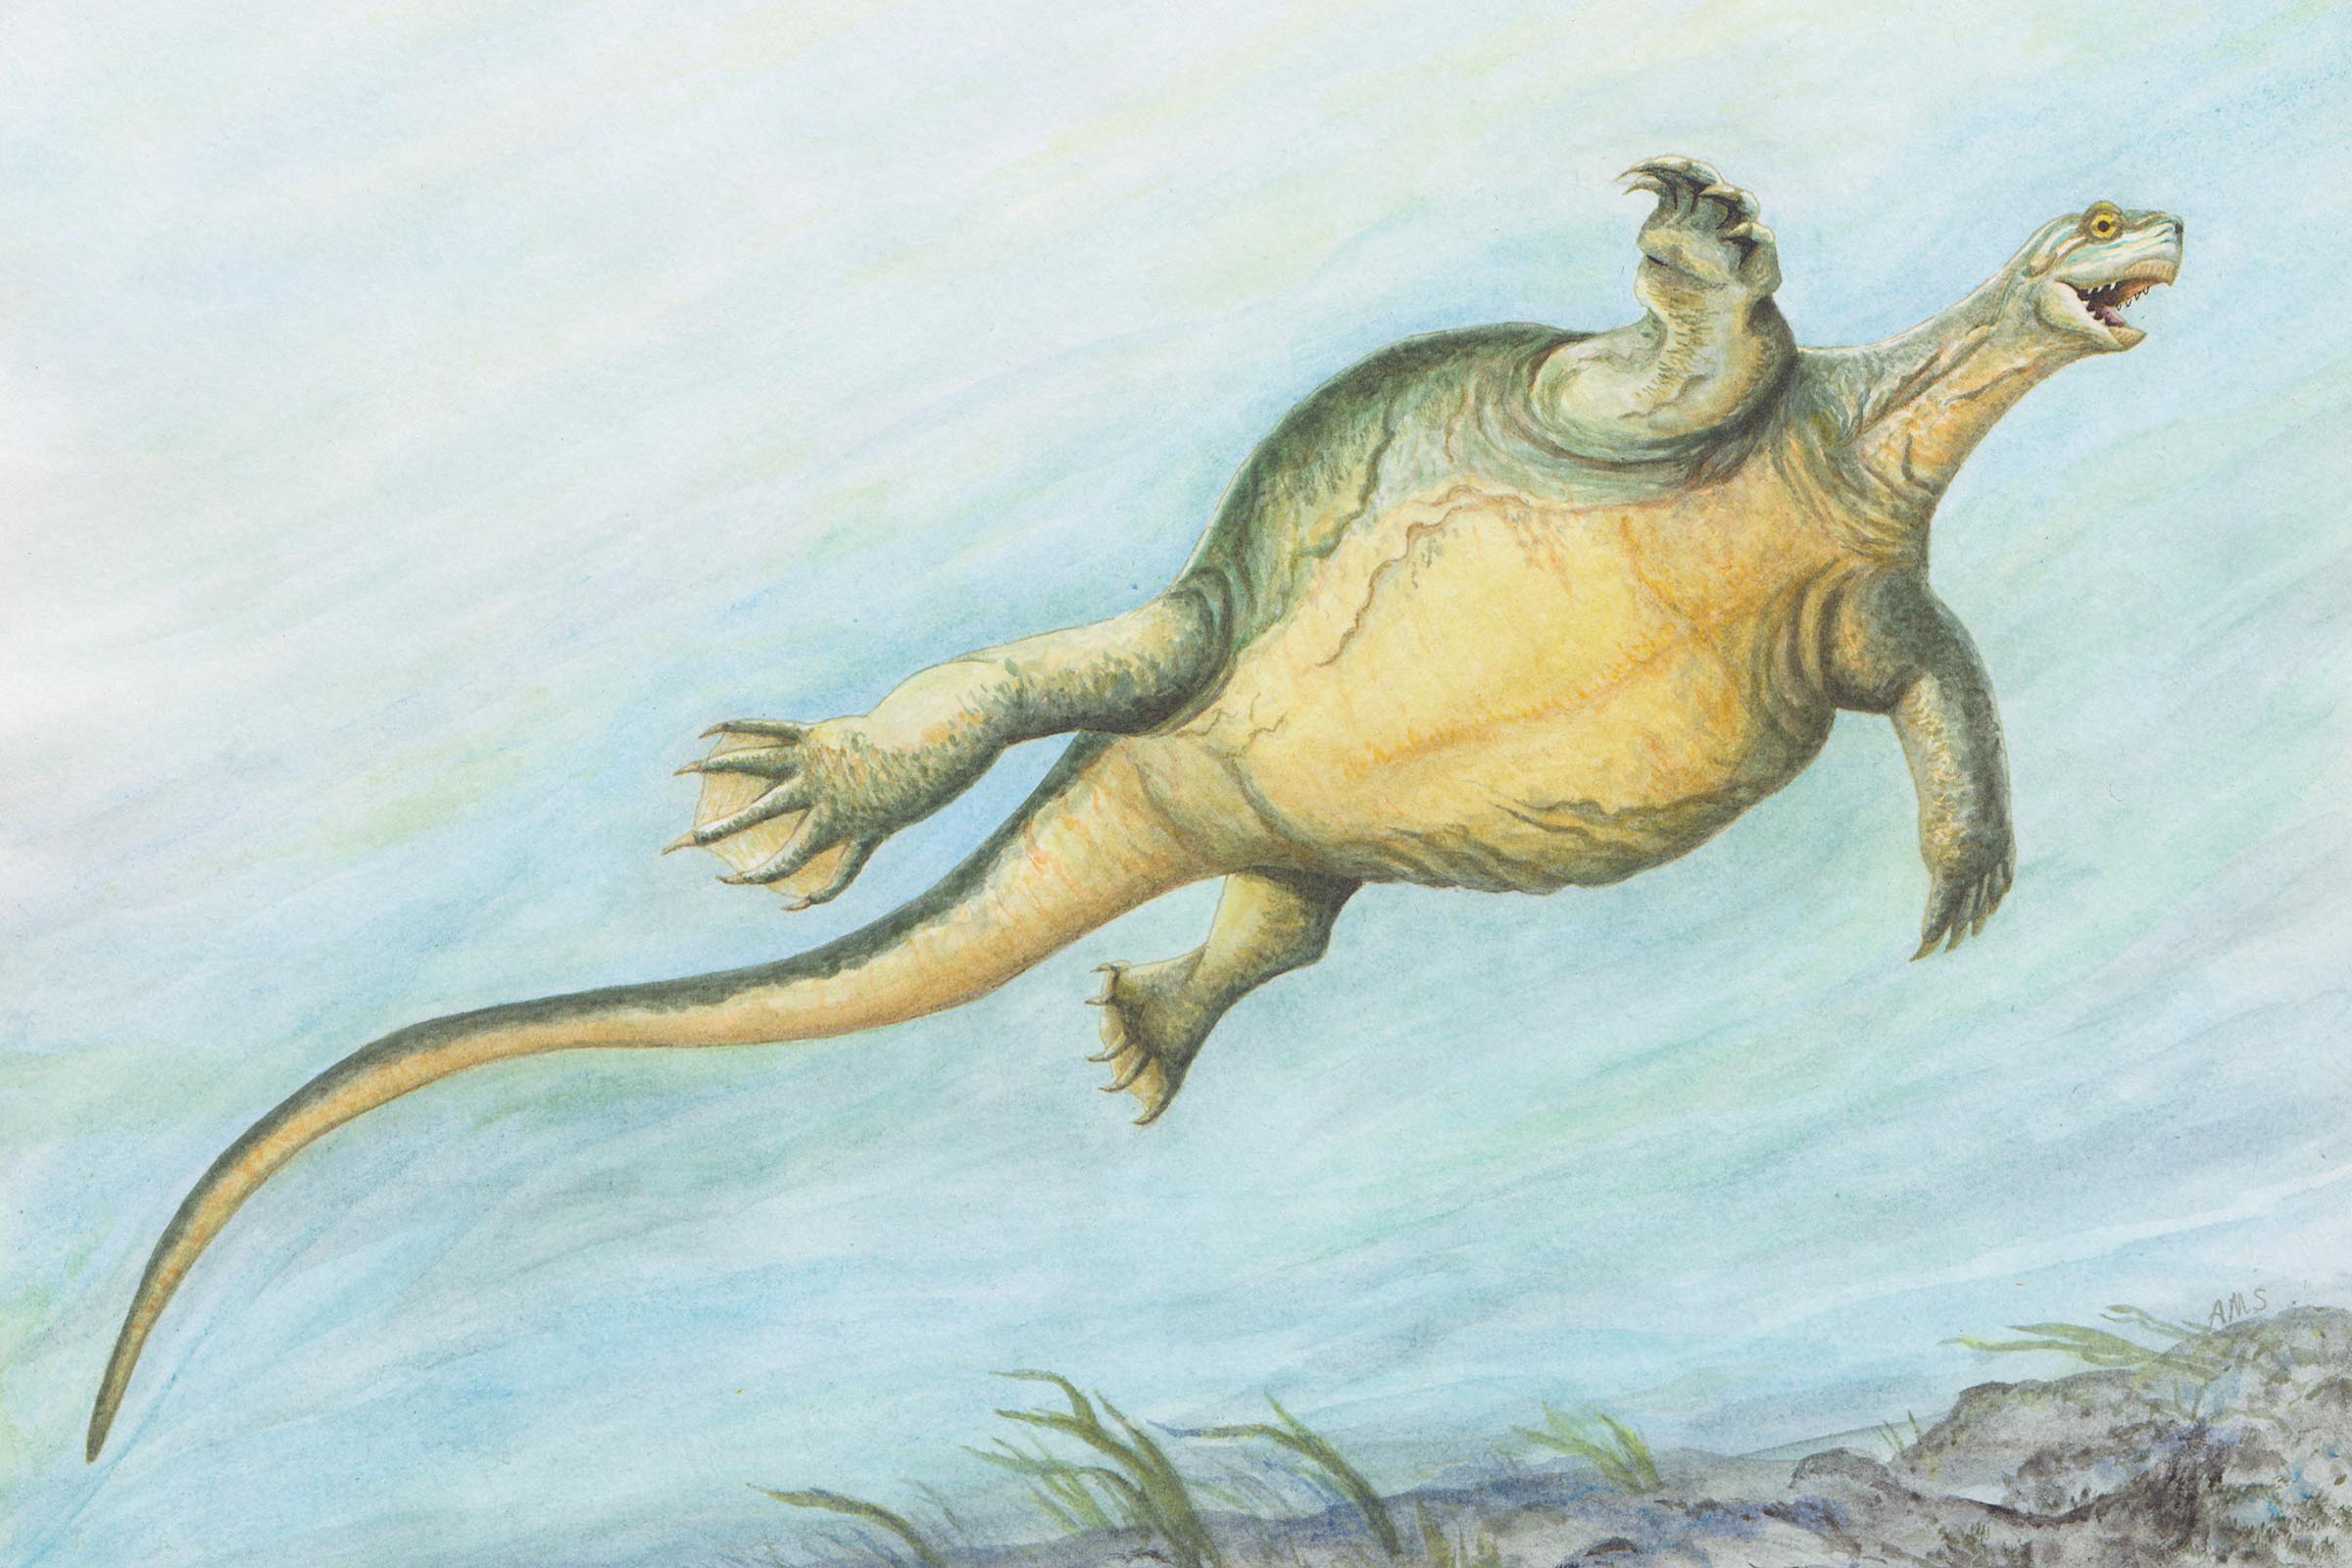 Illustration of a large, shell-less turtle with a rounded body and long tail, swimming underwater. The sea floor appears rocky, with some grasses.